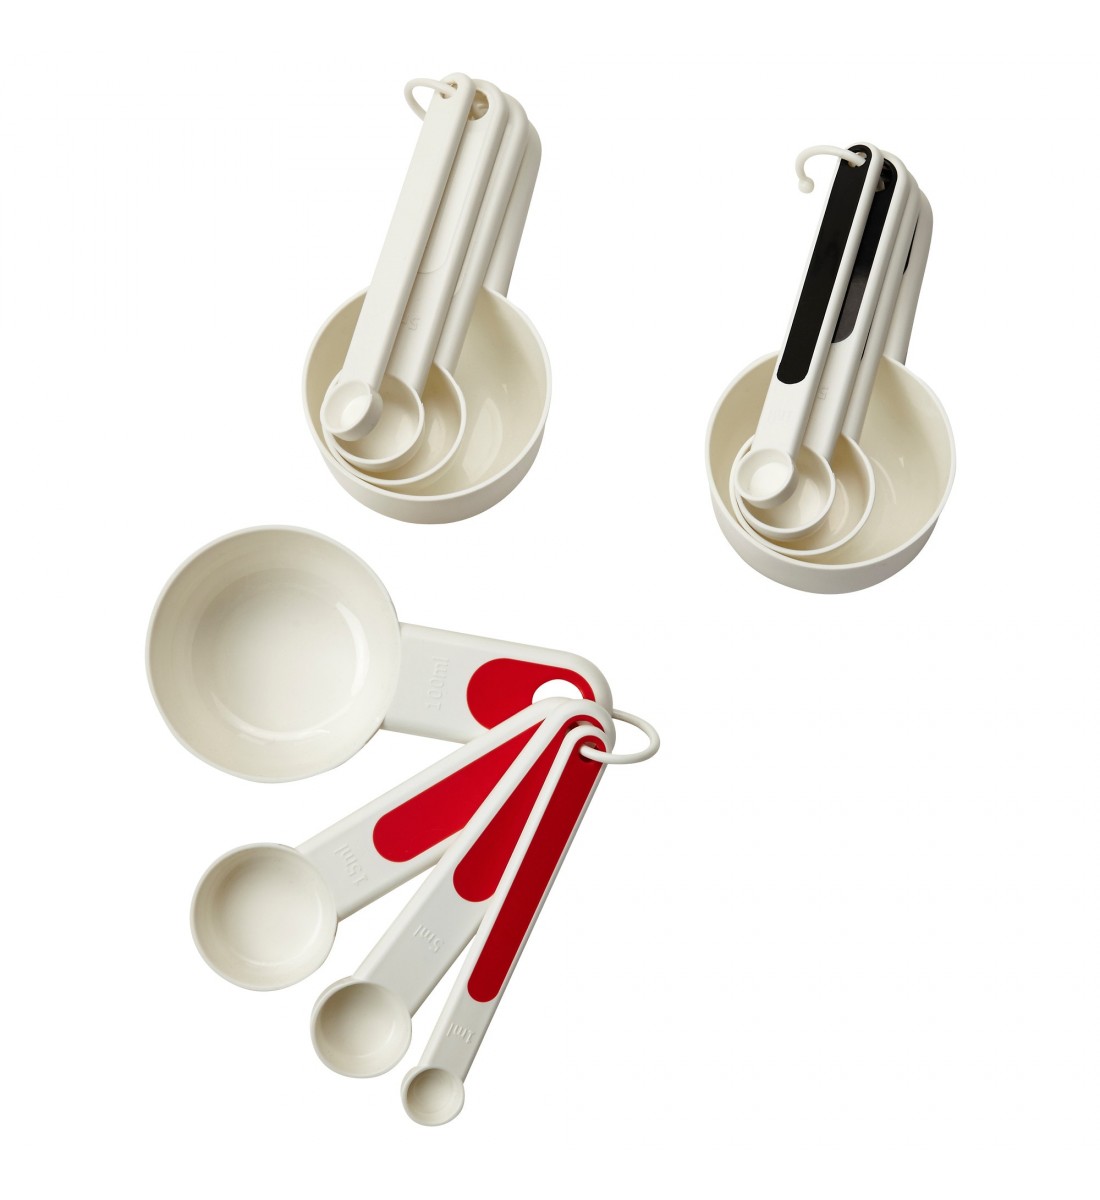 Set of 4 measuring cups, red/white/black